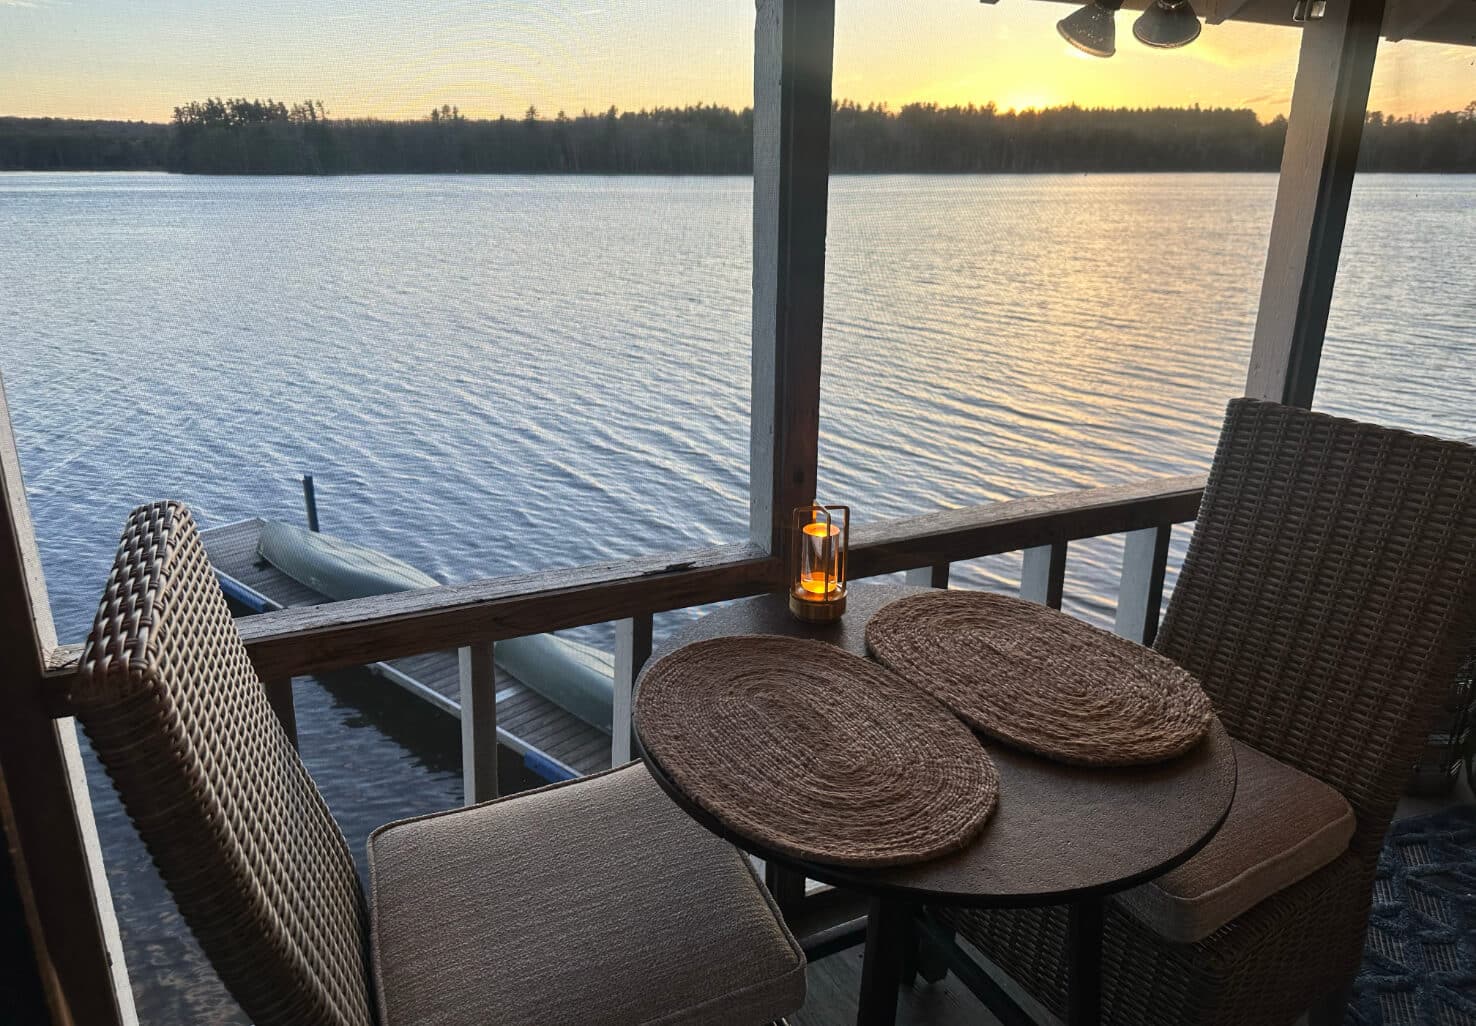 A dining room table and chairs for two overlooking a lake